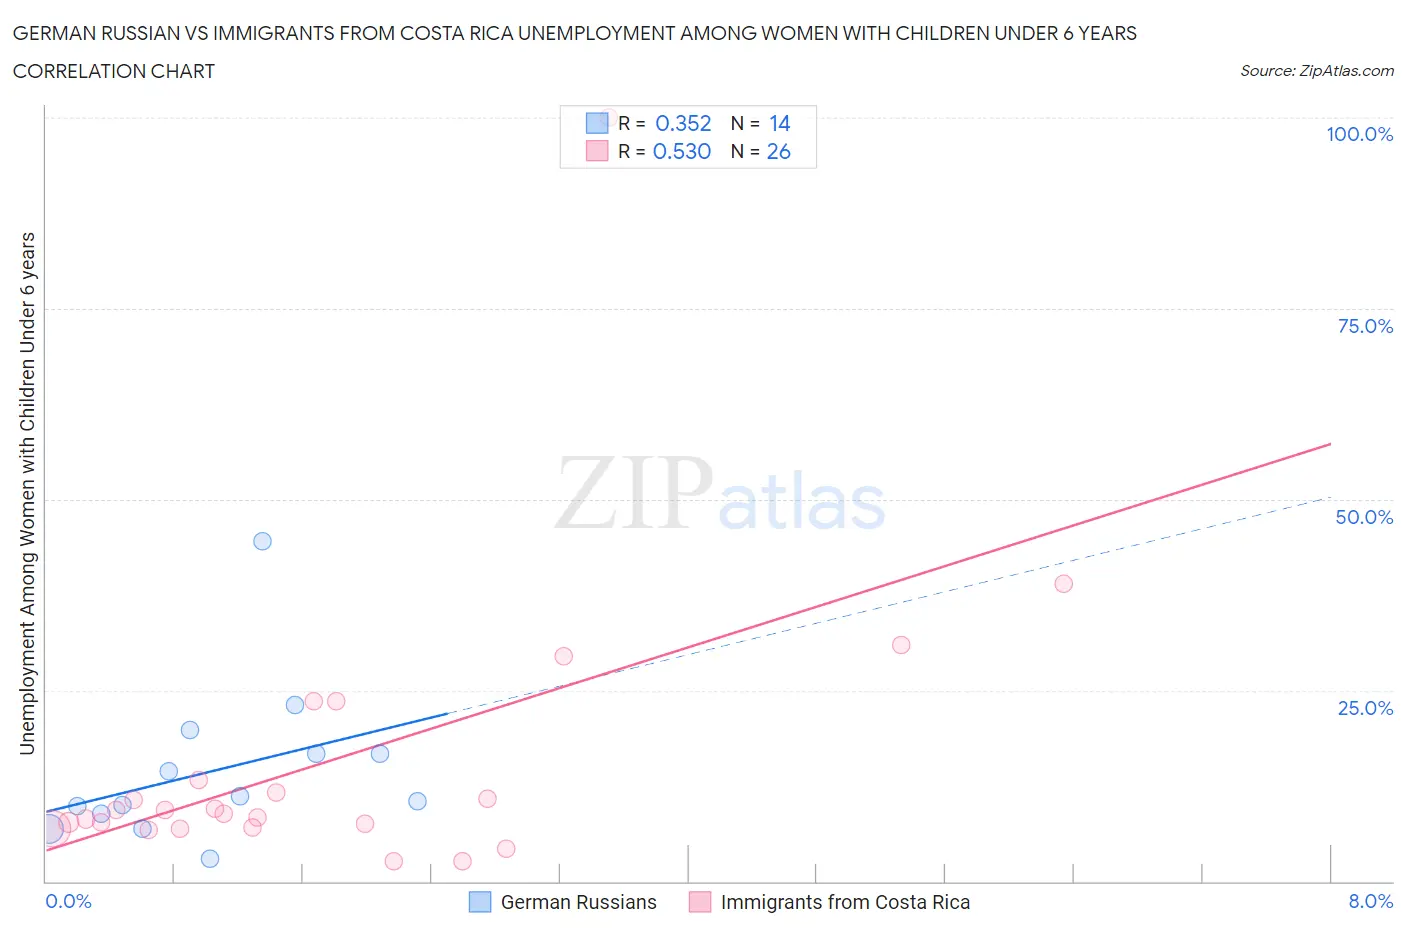 German Russian vs Immigrants from Costa Rica Unemployment Among Women with Children Under 6 years